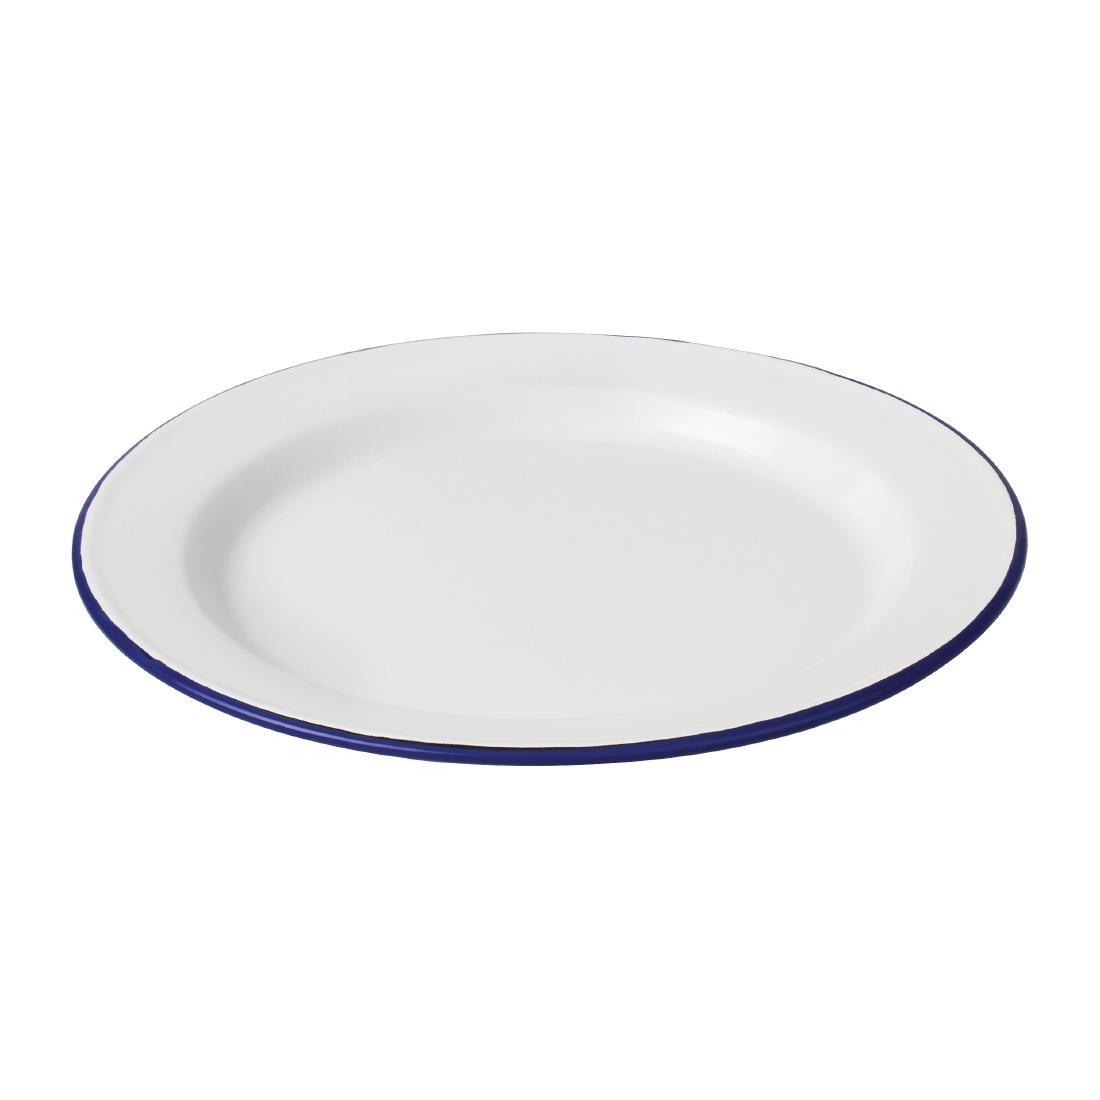 Olympia Enamel Dinner Plates 300mm (Pack of 6) - DC388  - 3